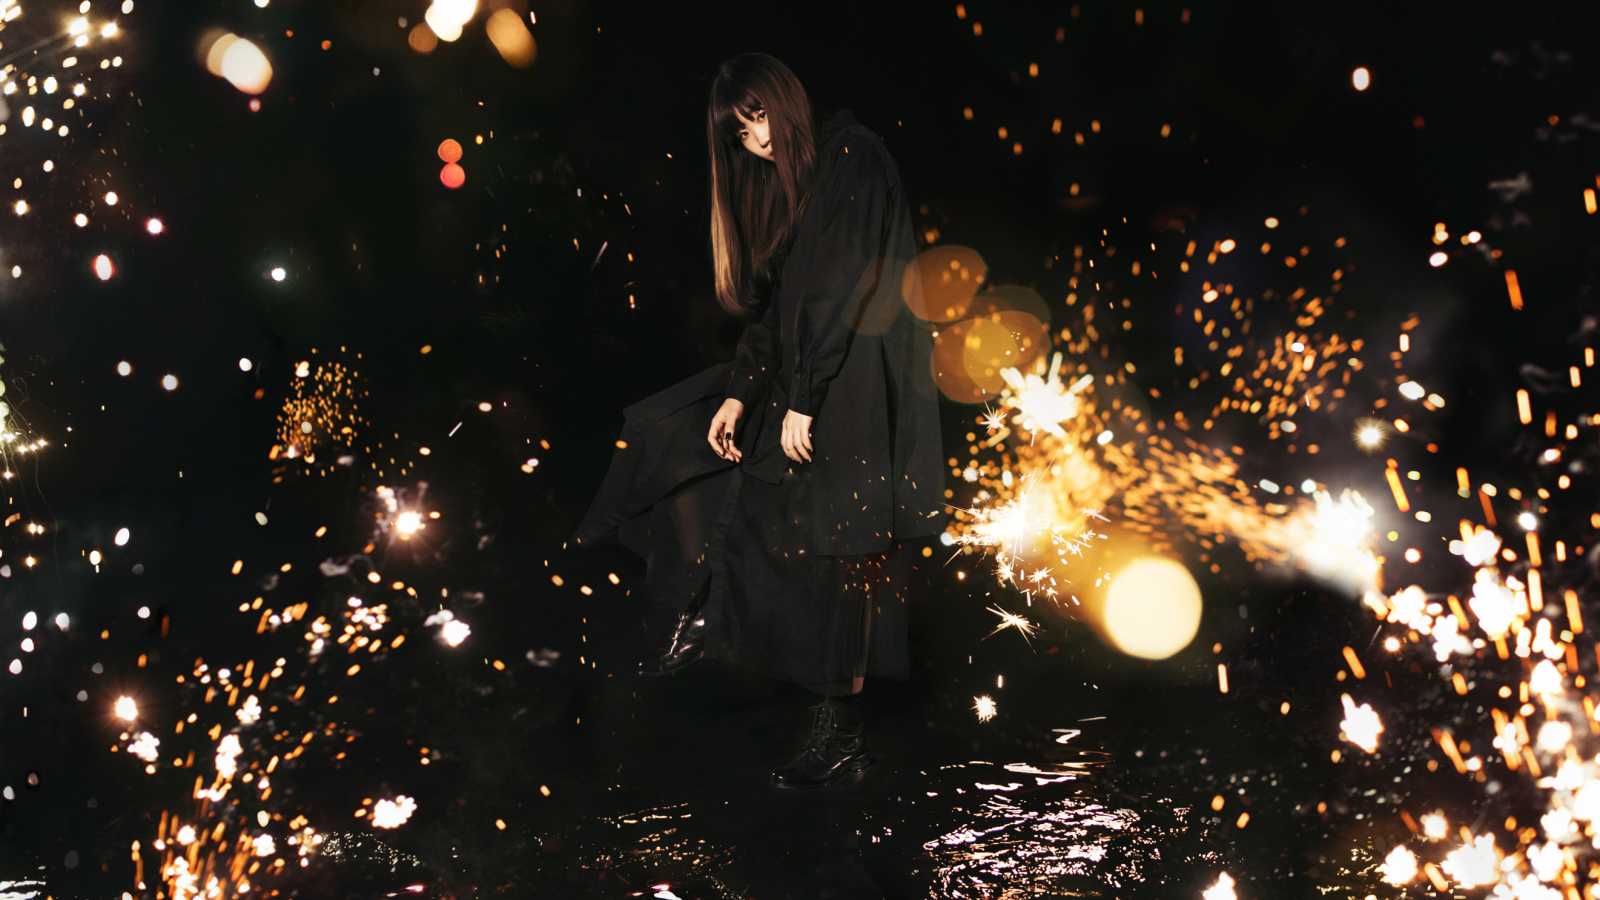 Aimer Announces Live Stream Concert © Sony Music. All rights reserved.